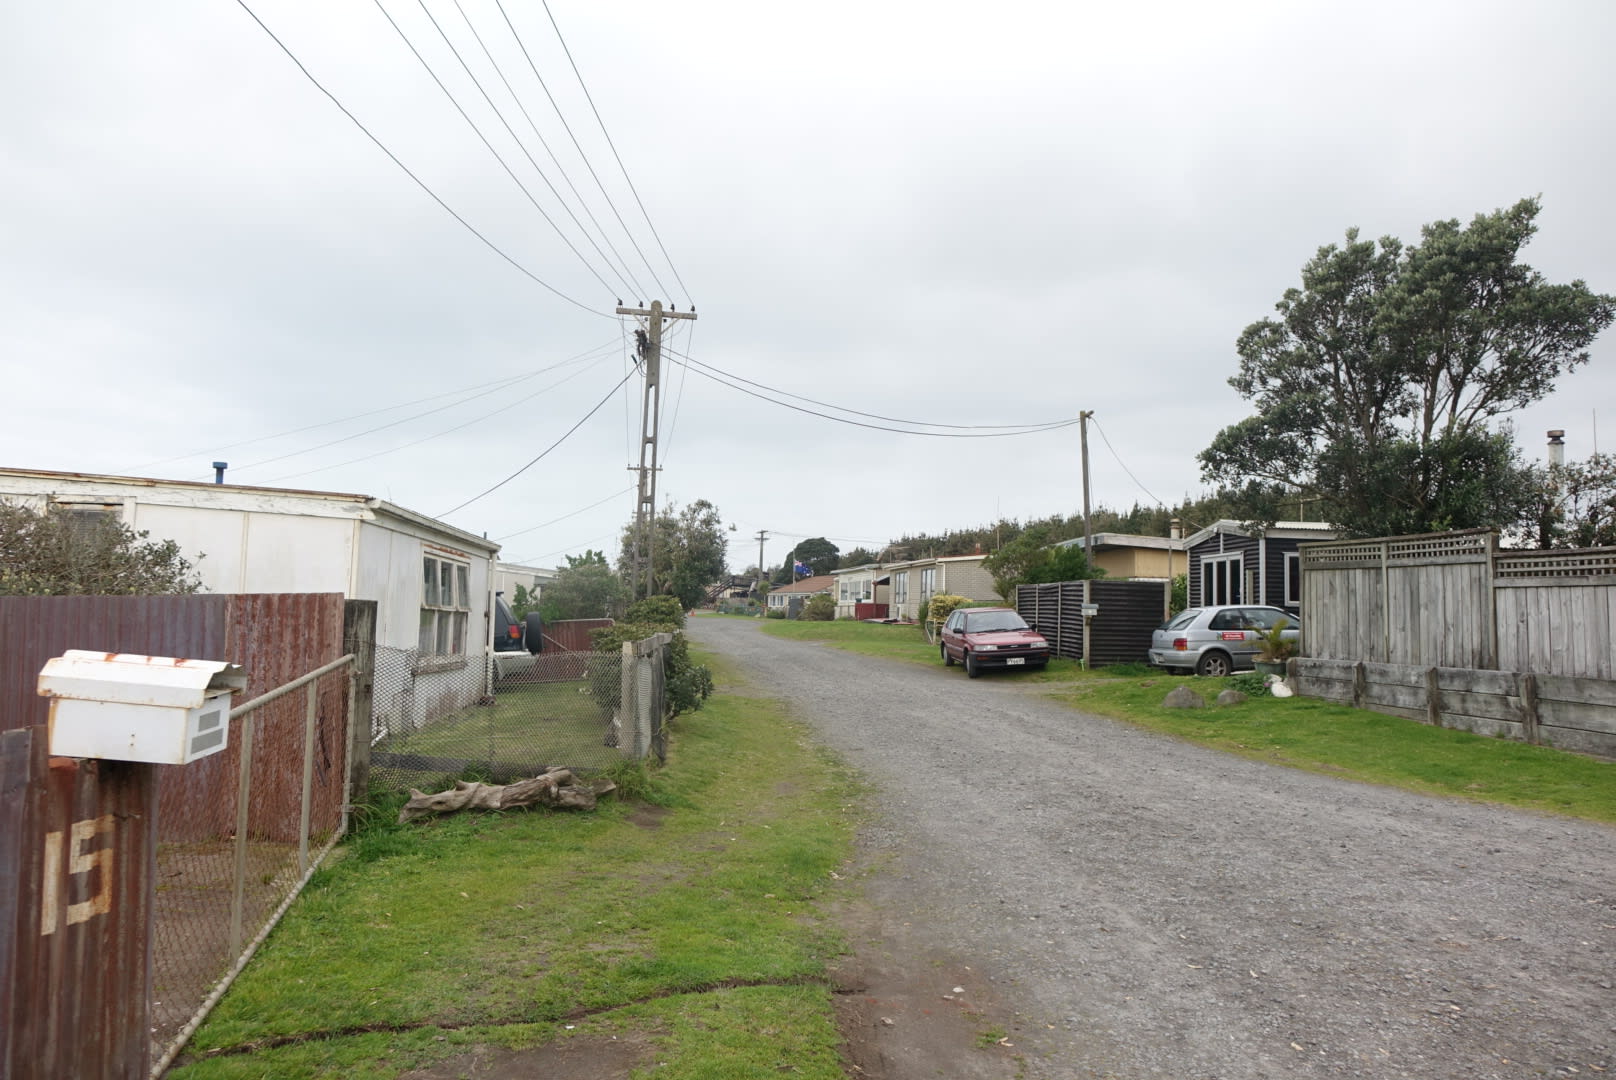 There are about 30 homes in the Rohotu Block at Waitara's East Beach.